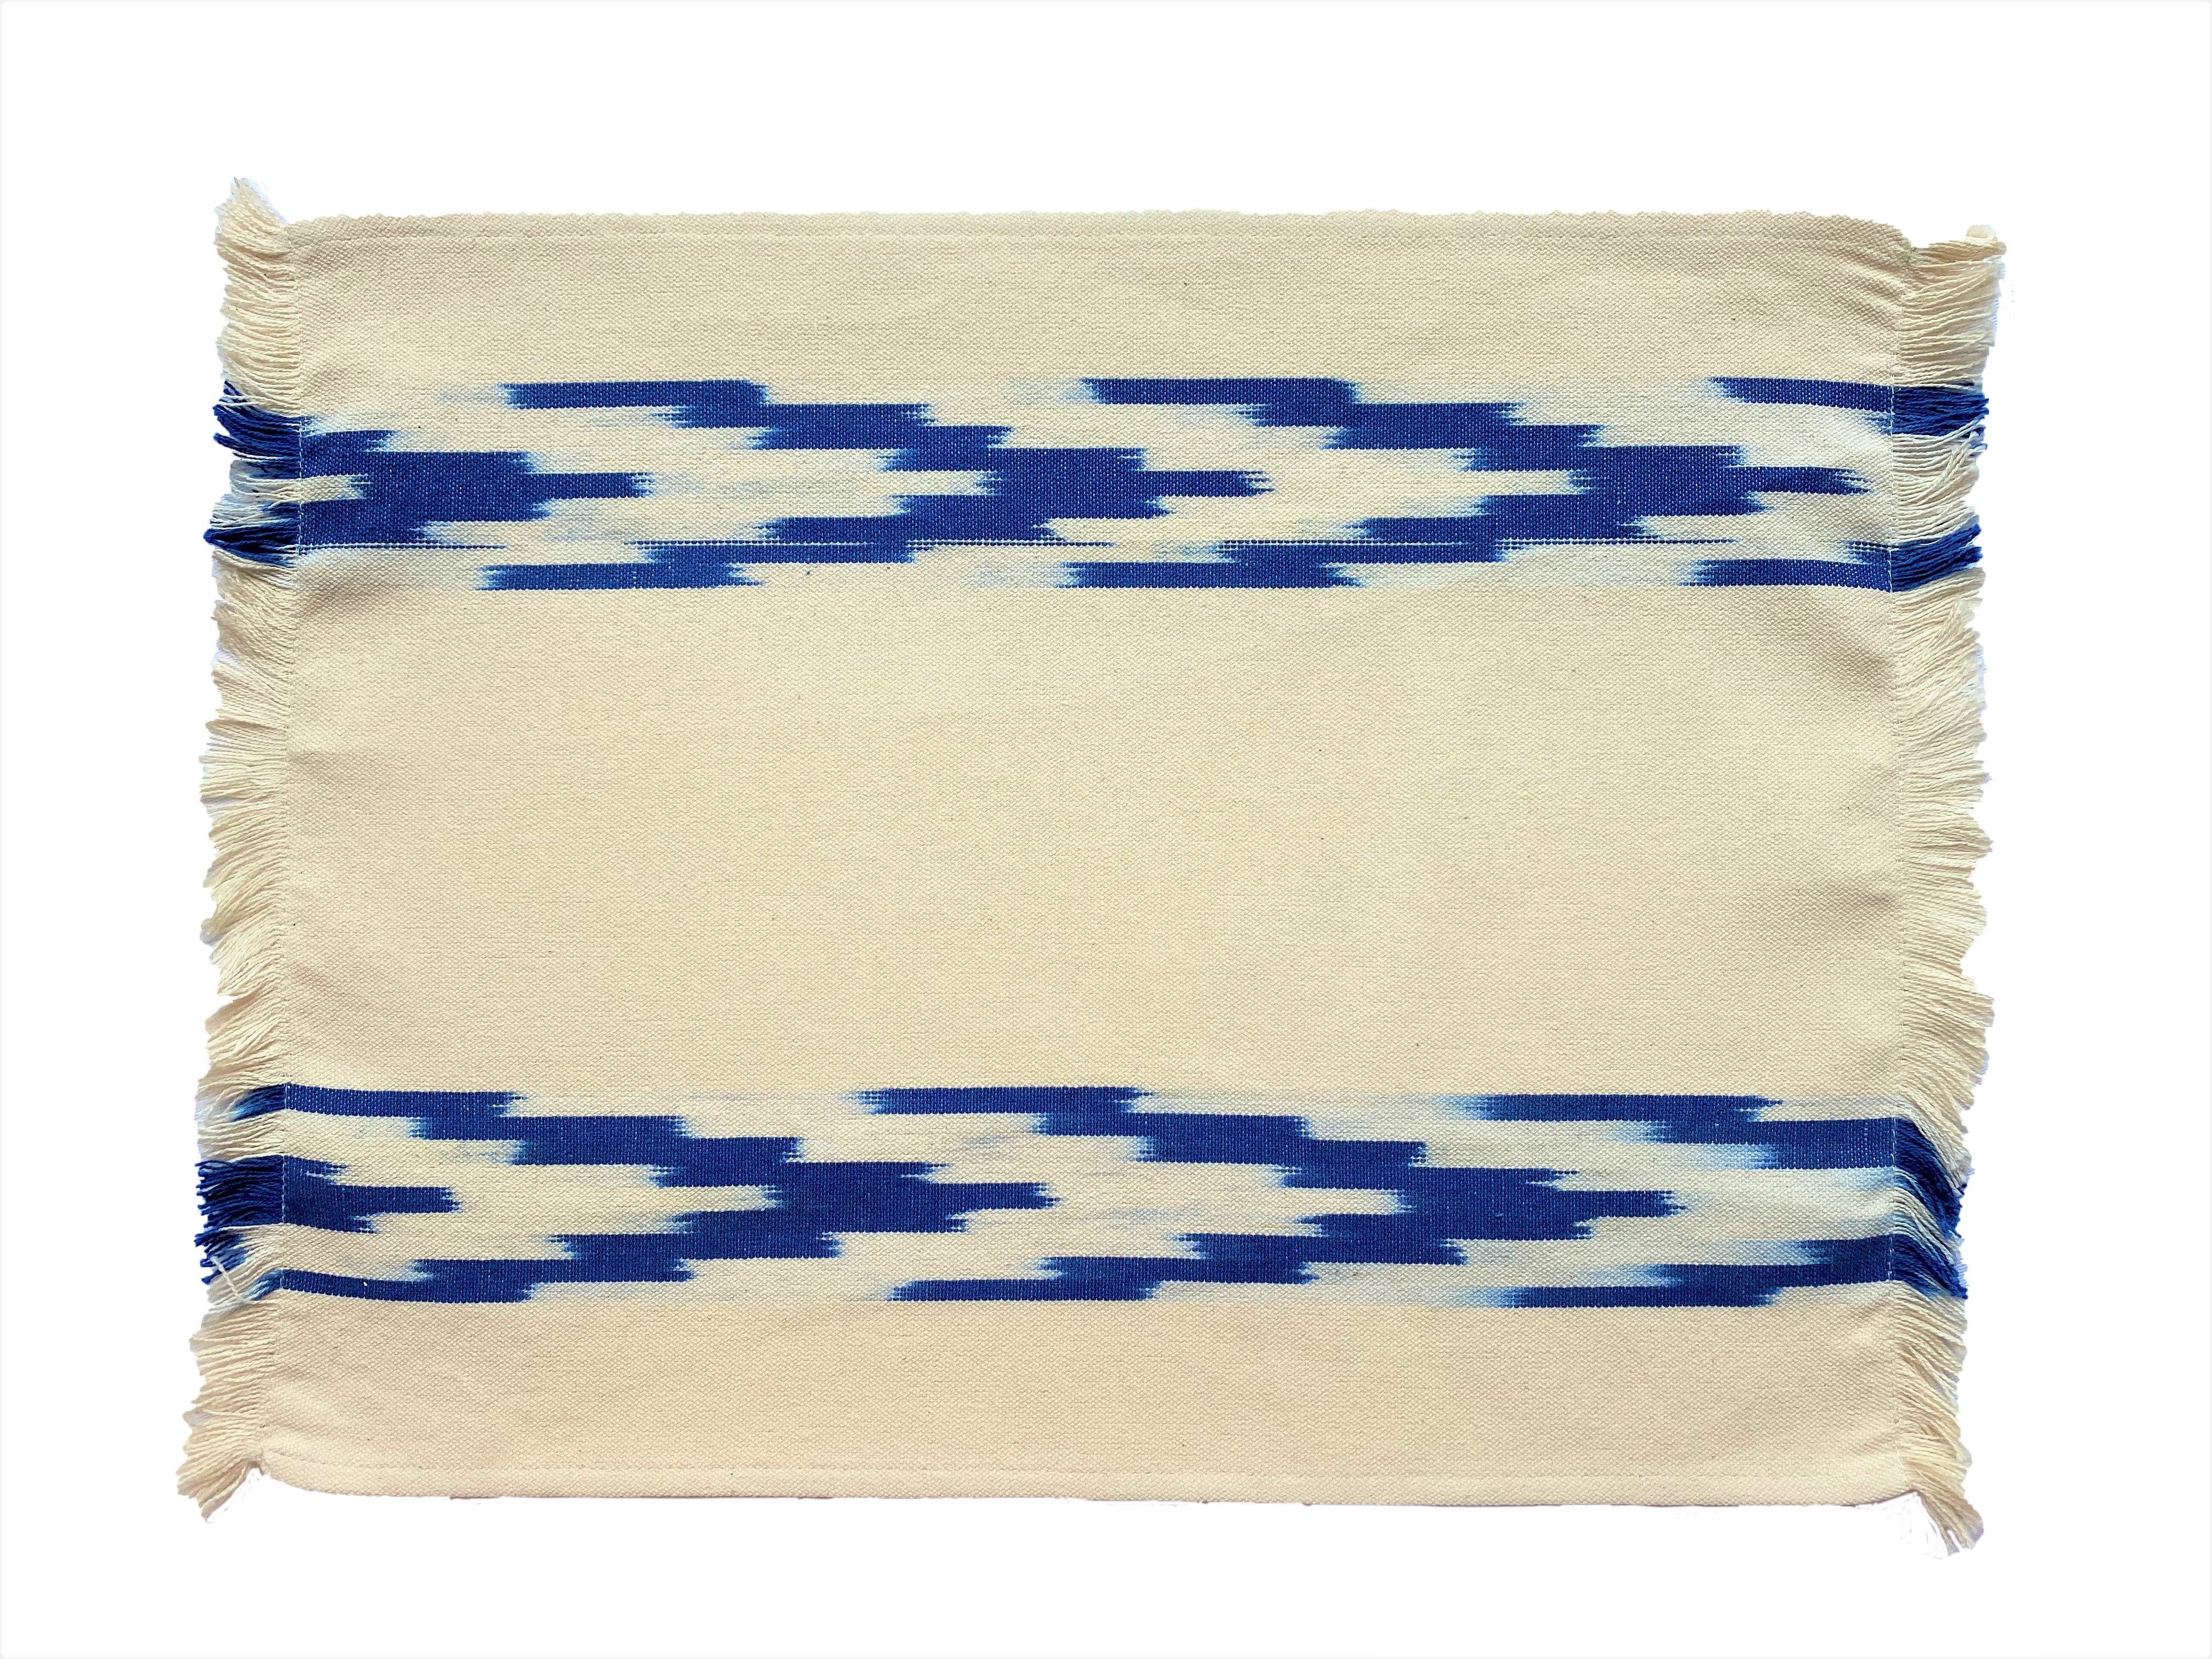 FABRIC PLACEMAT - CREAM WITH BLUE IKAT CHEVRON